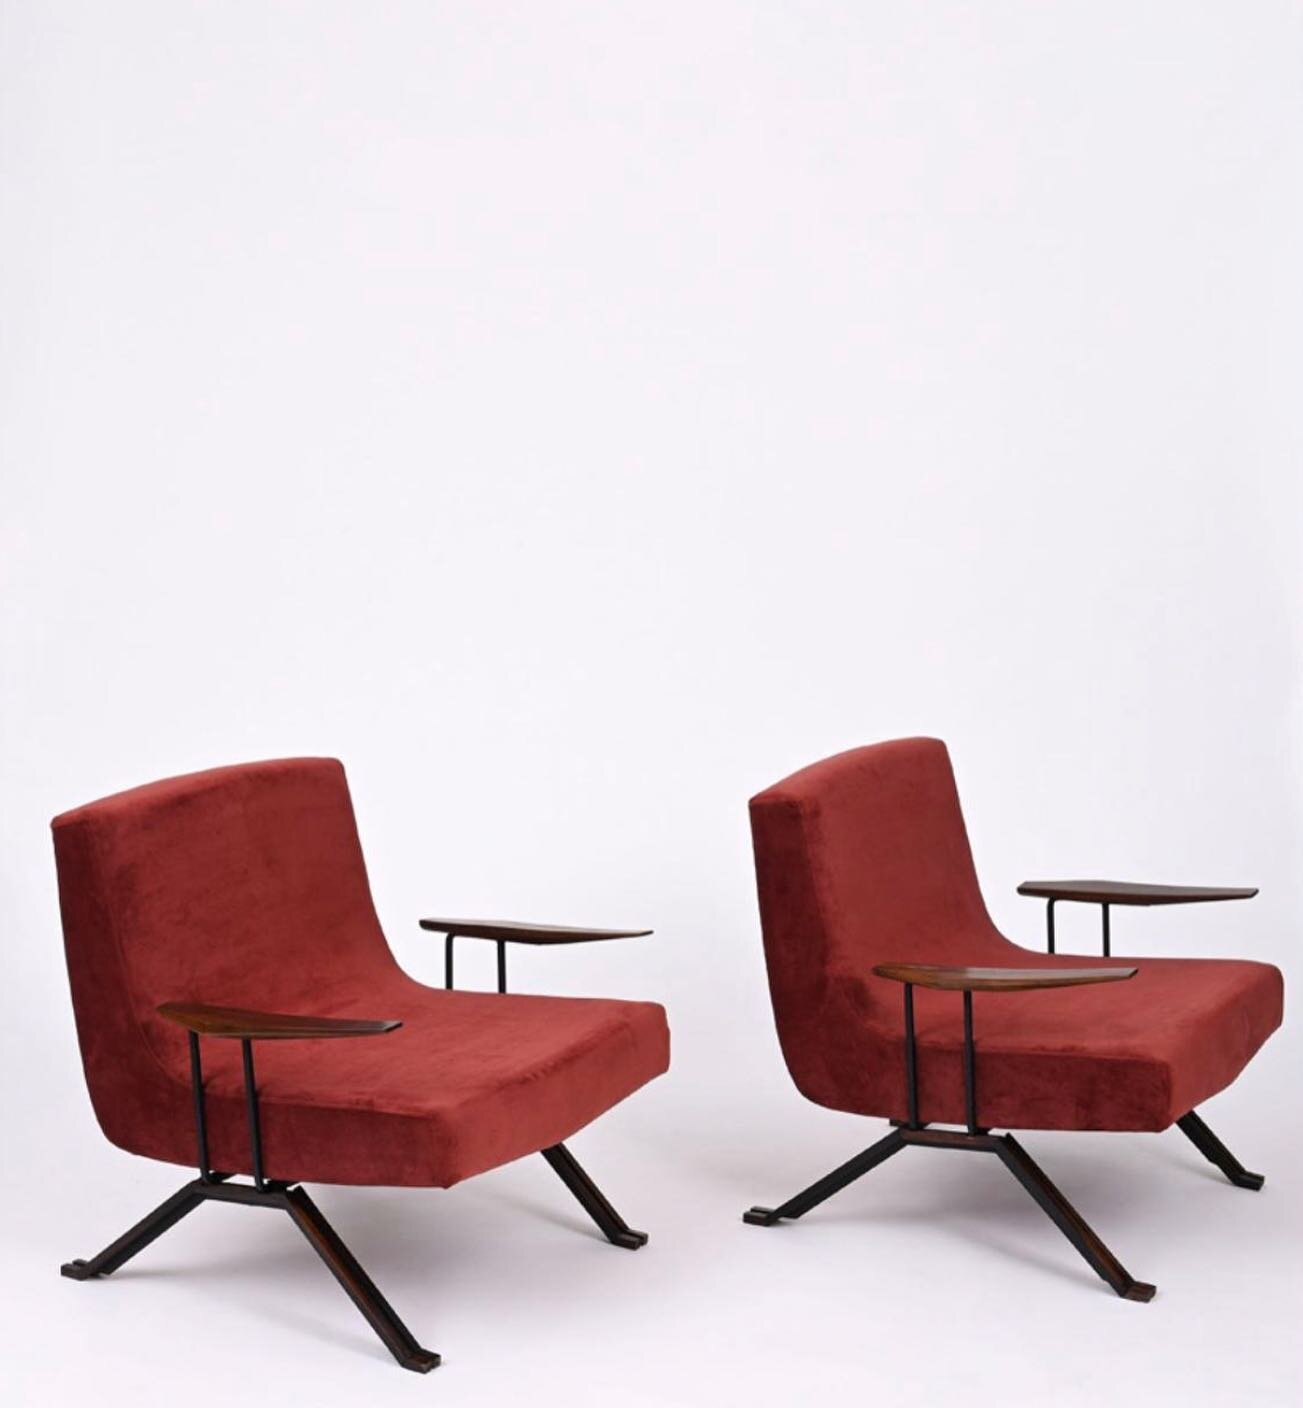 This pair of gorgeous Percival Lafer chairs from Brazil, circa 1960 are part of my office project and I couldn&rsquo;t be happier about them. They are made of Rosewood (my favorite wood), metal and fabric, and have such a beautiful patina. Stunning a